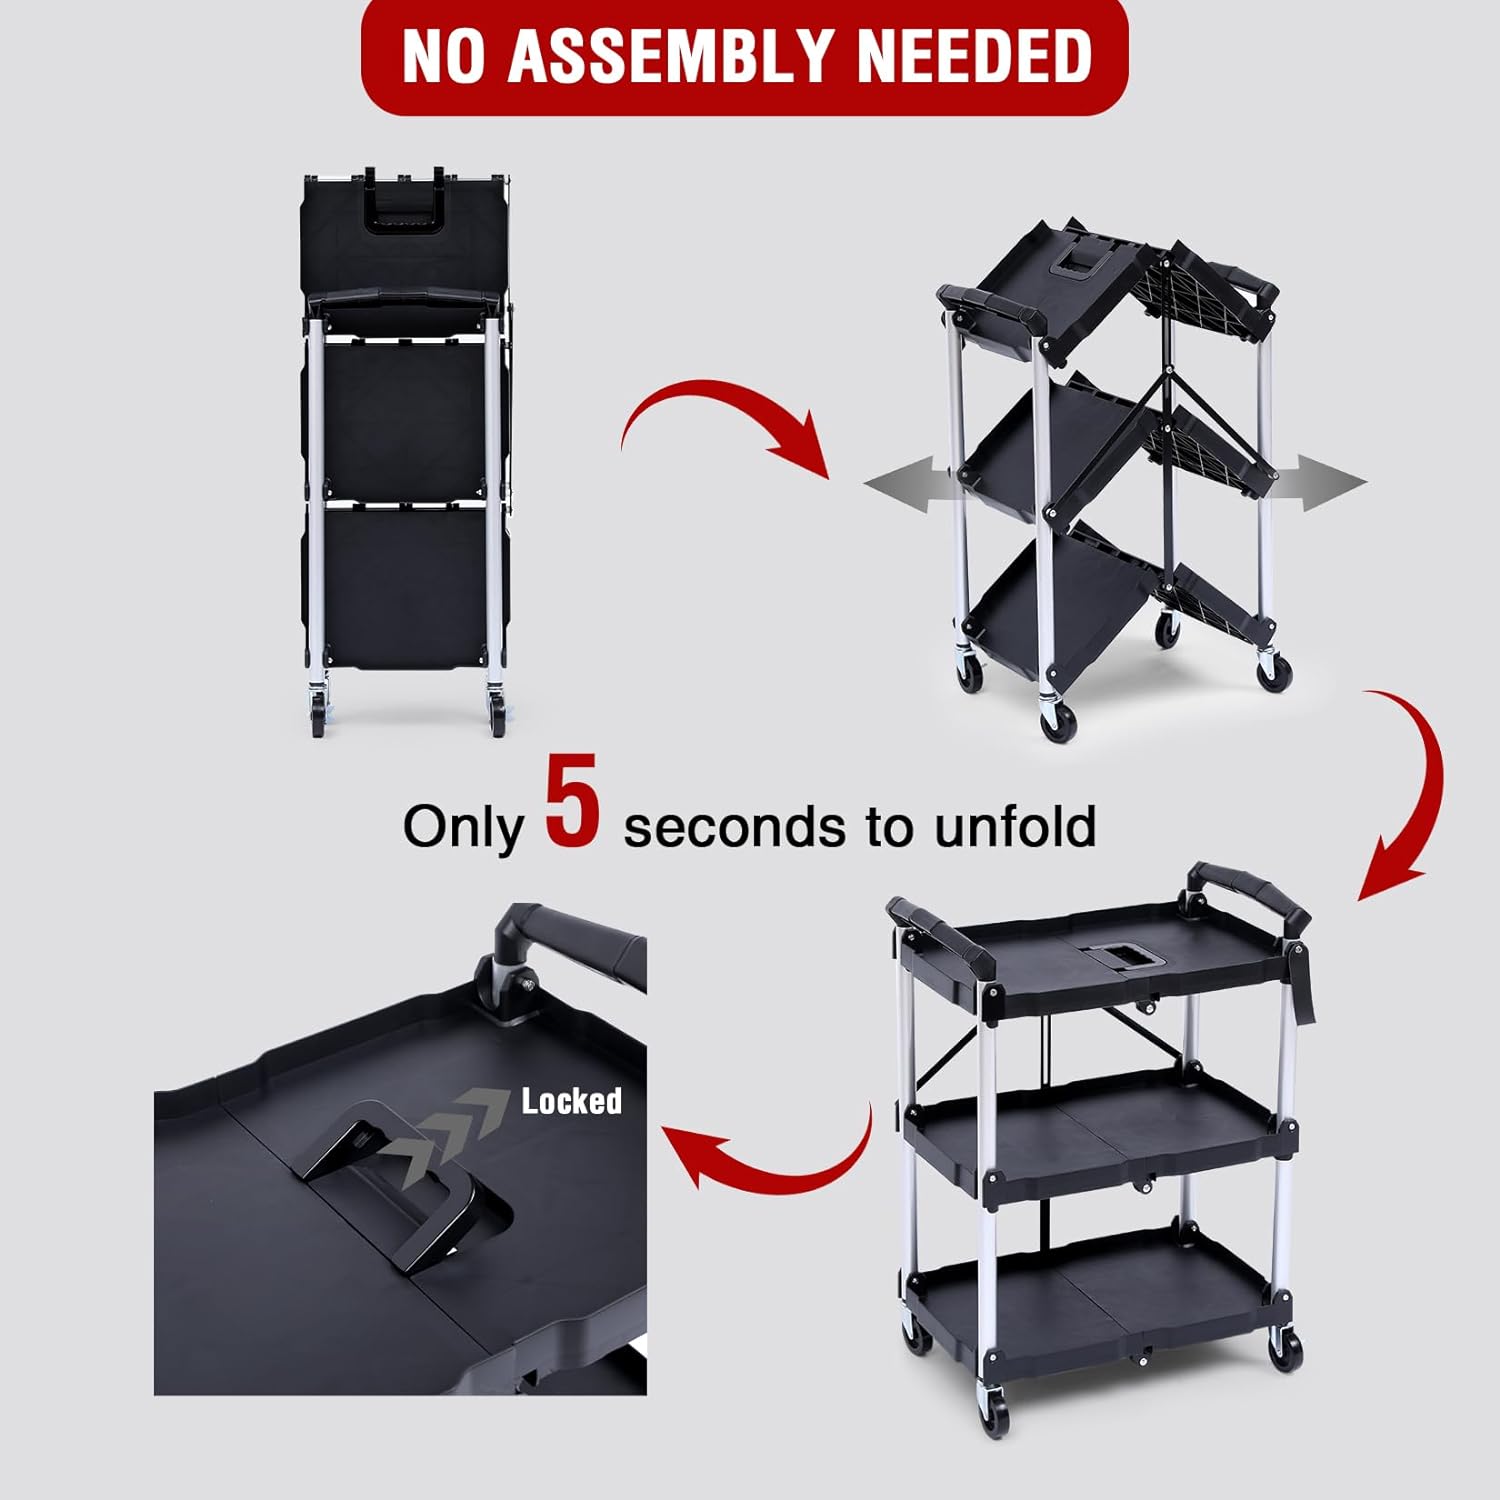 Folding Utility Cart with Wheels - Foldable 3-Tier Rolling Cart with Lockable Wheels, Portable Tool Cart for Office, Warehouse, Home, Garage, Kitchen